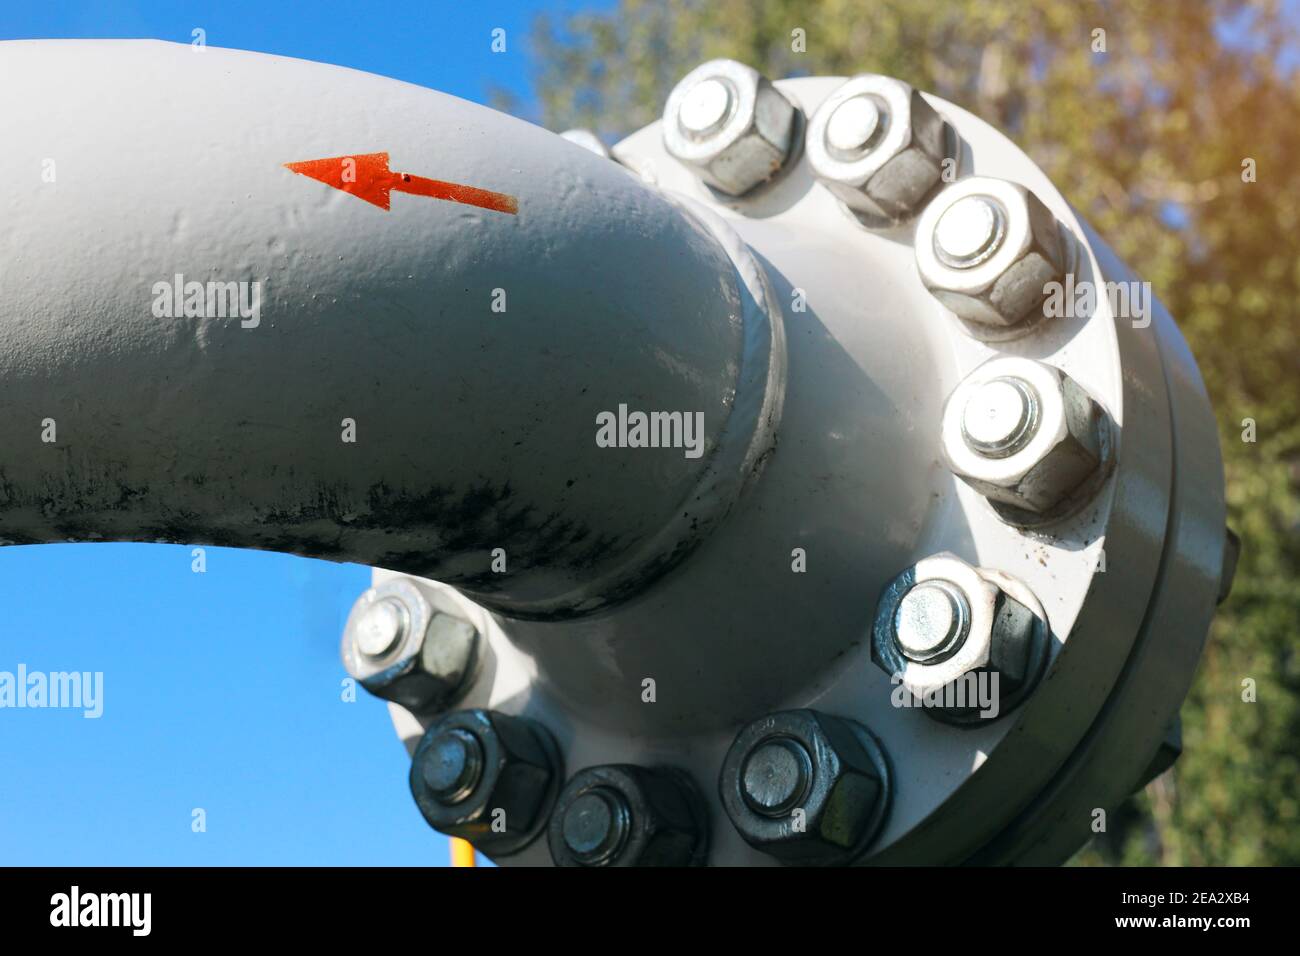 The red arrow on the gray pipe indicates the direction of the gas flow.  Stock Photo